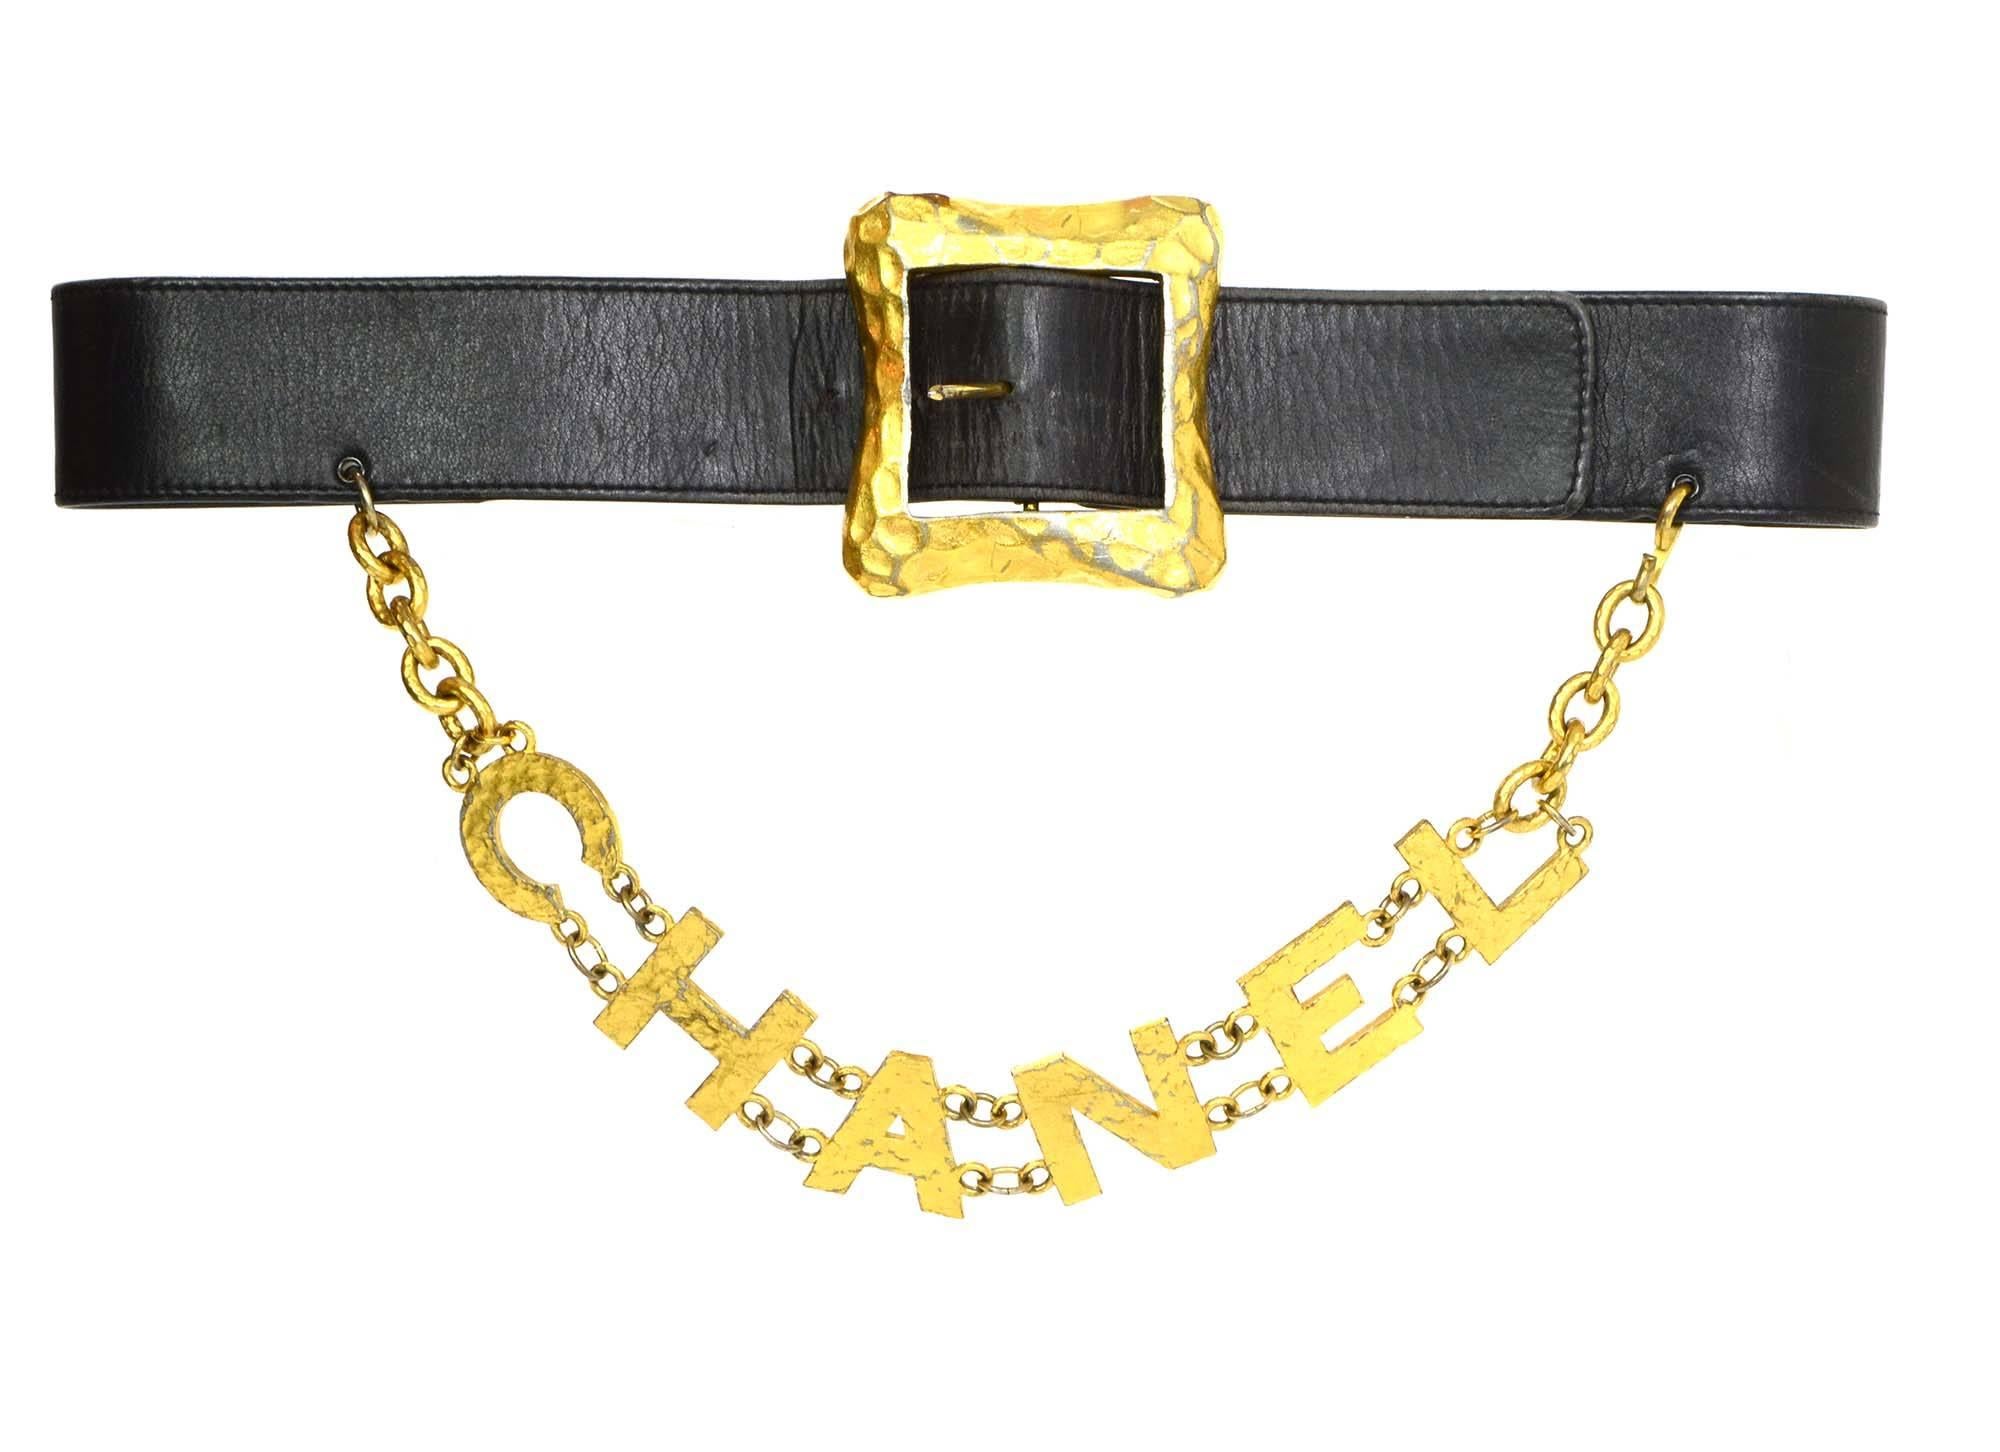 CHANEL Black Leather Belt With "CHANEL" Tier